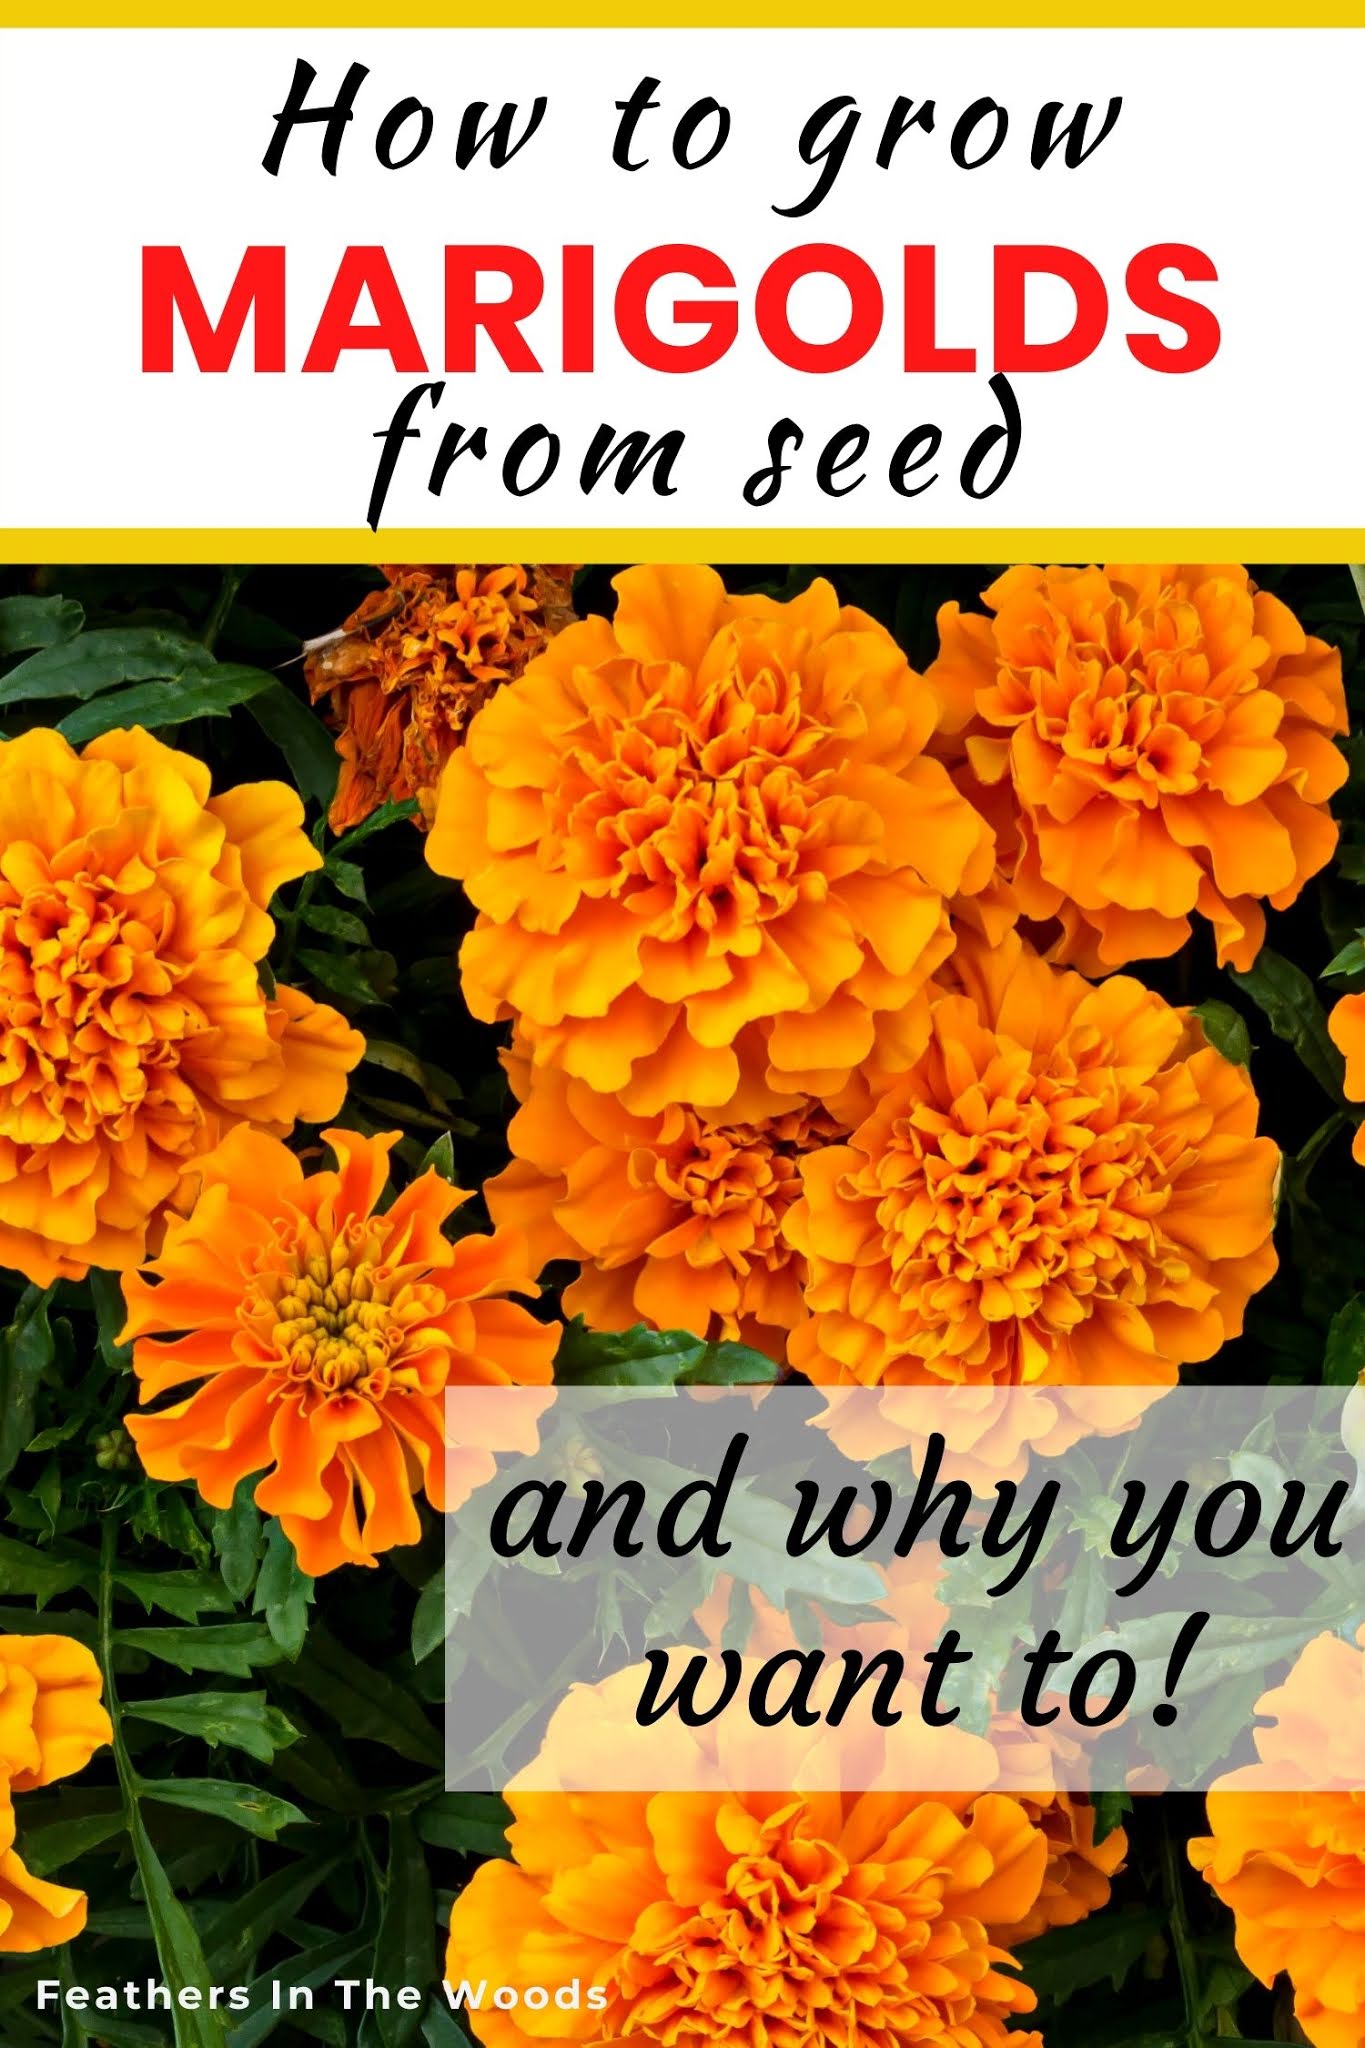 How to grow marigolds from seed